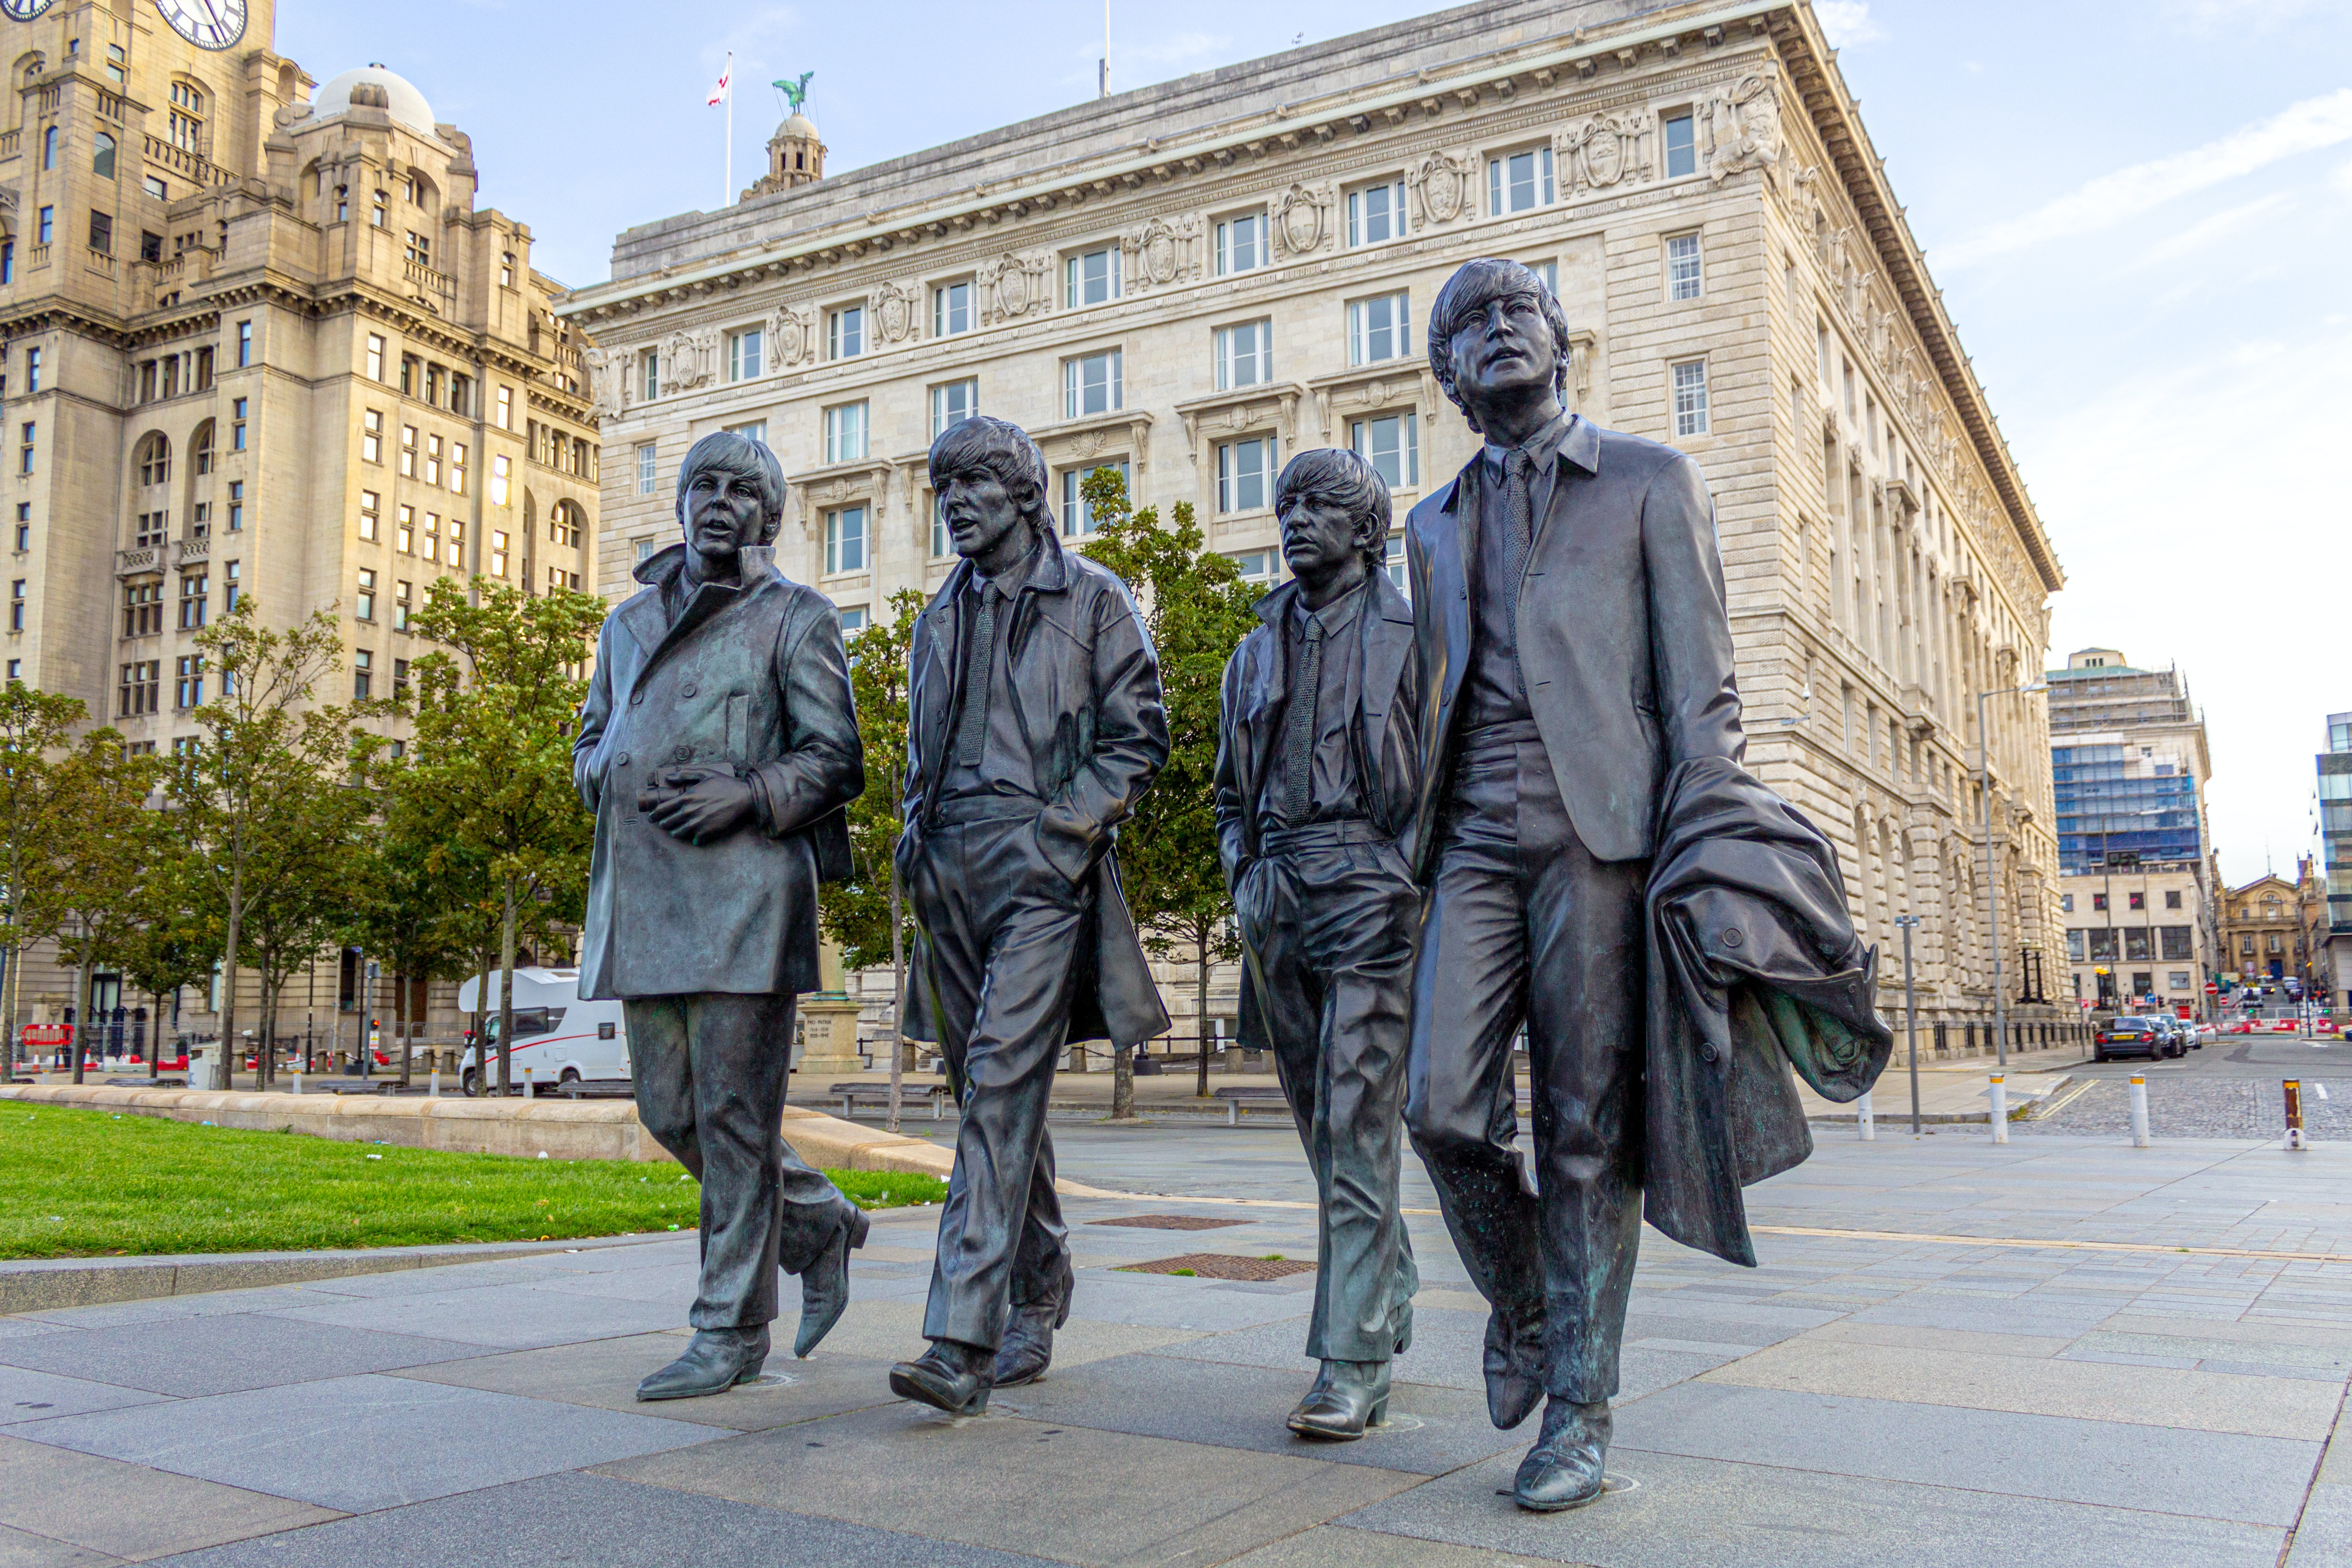 Liverpool is one of the cheapest places to buy a house in the UK—and thanks to the Beatles, a cultural hub. 